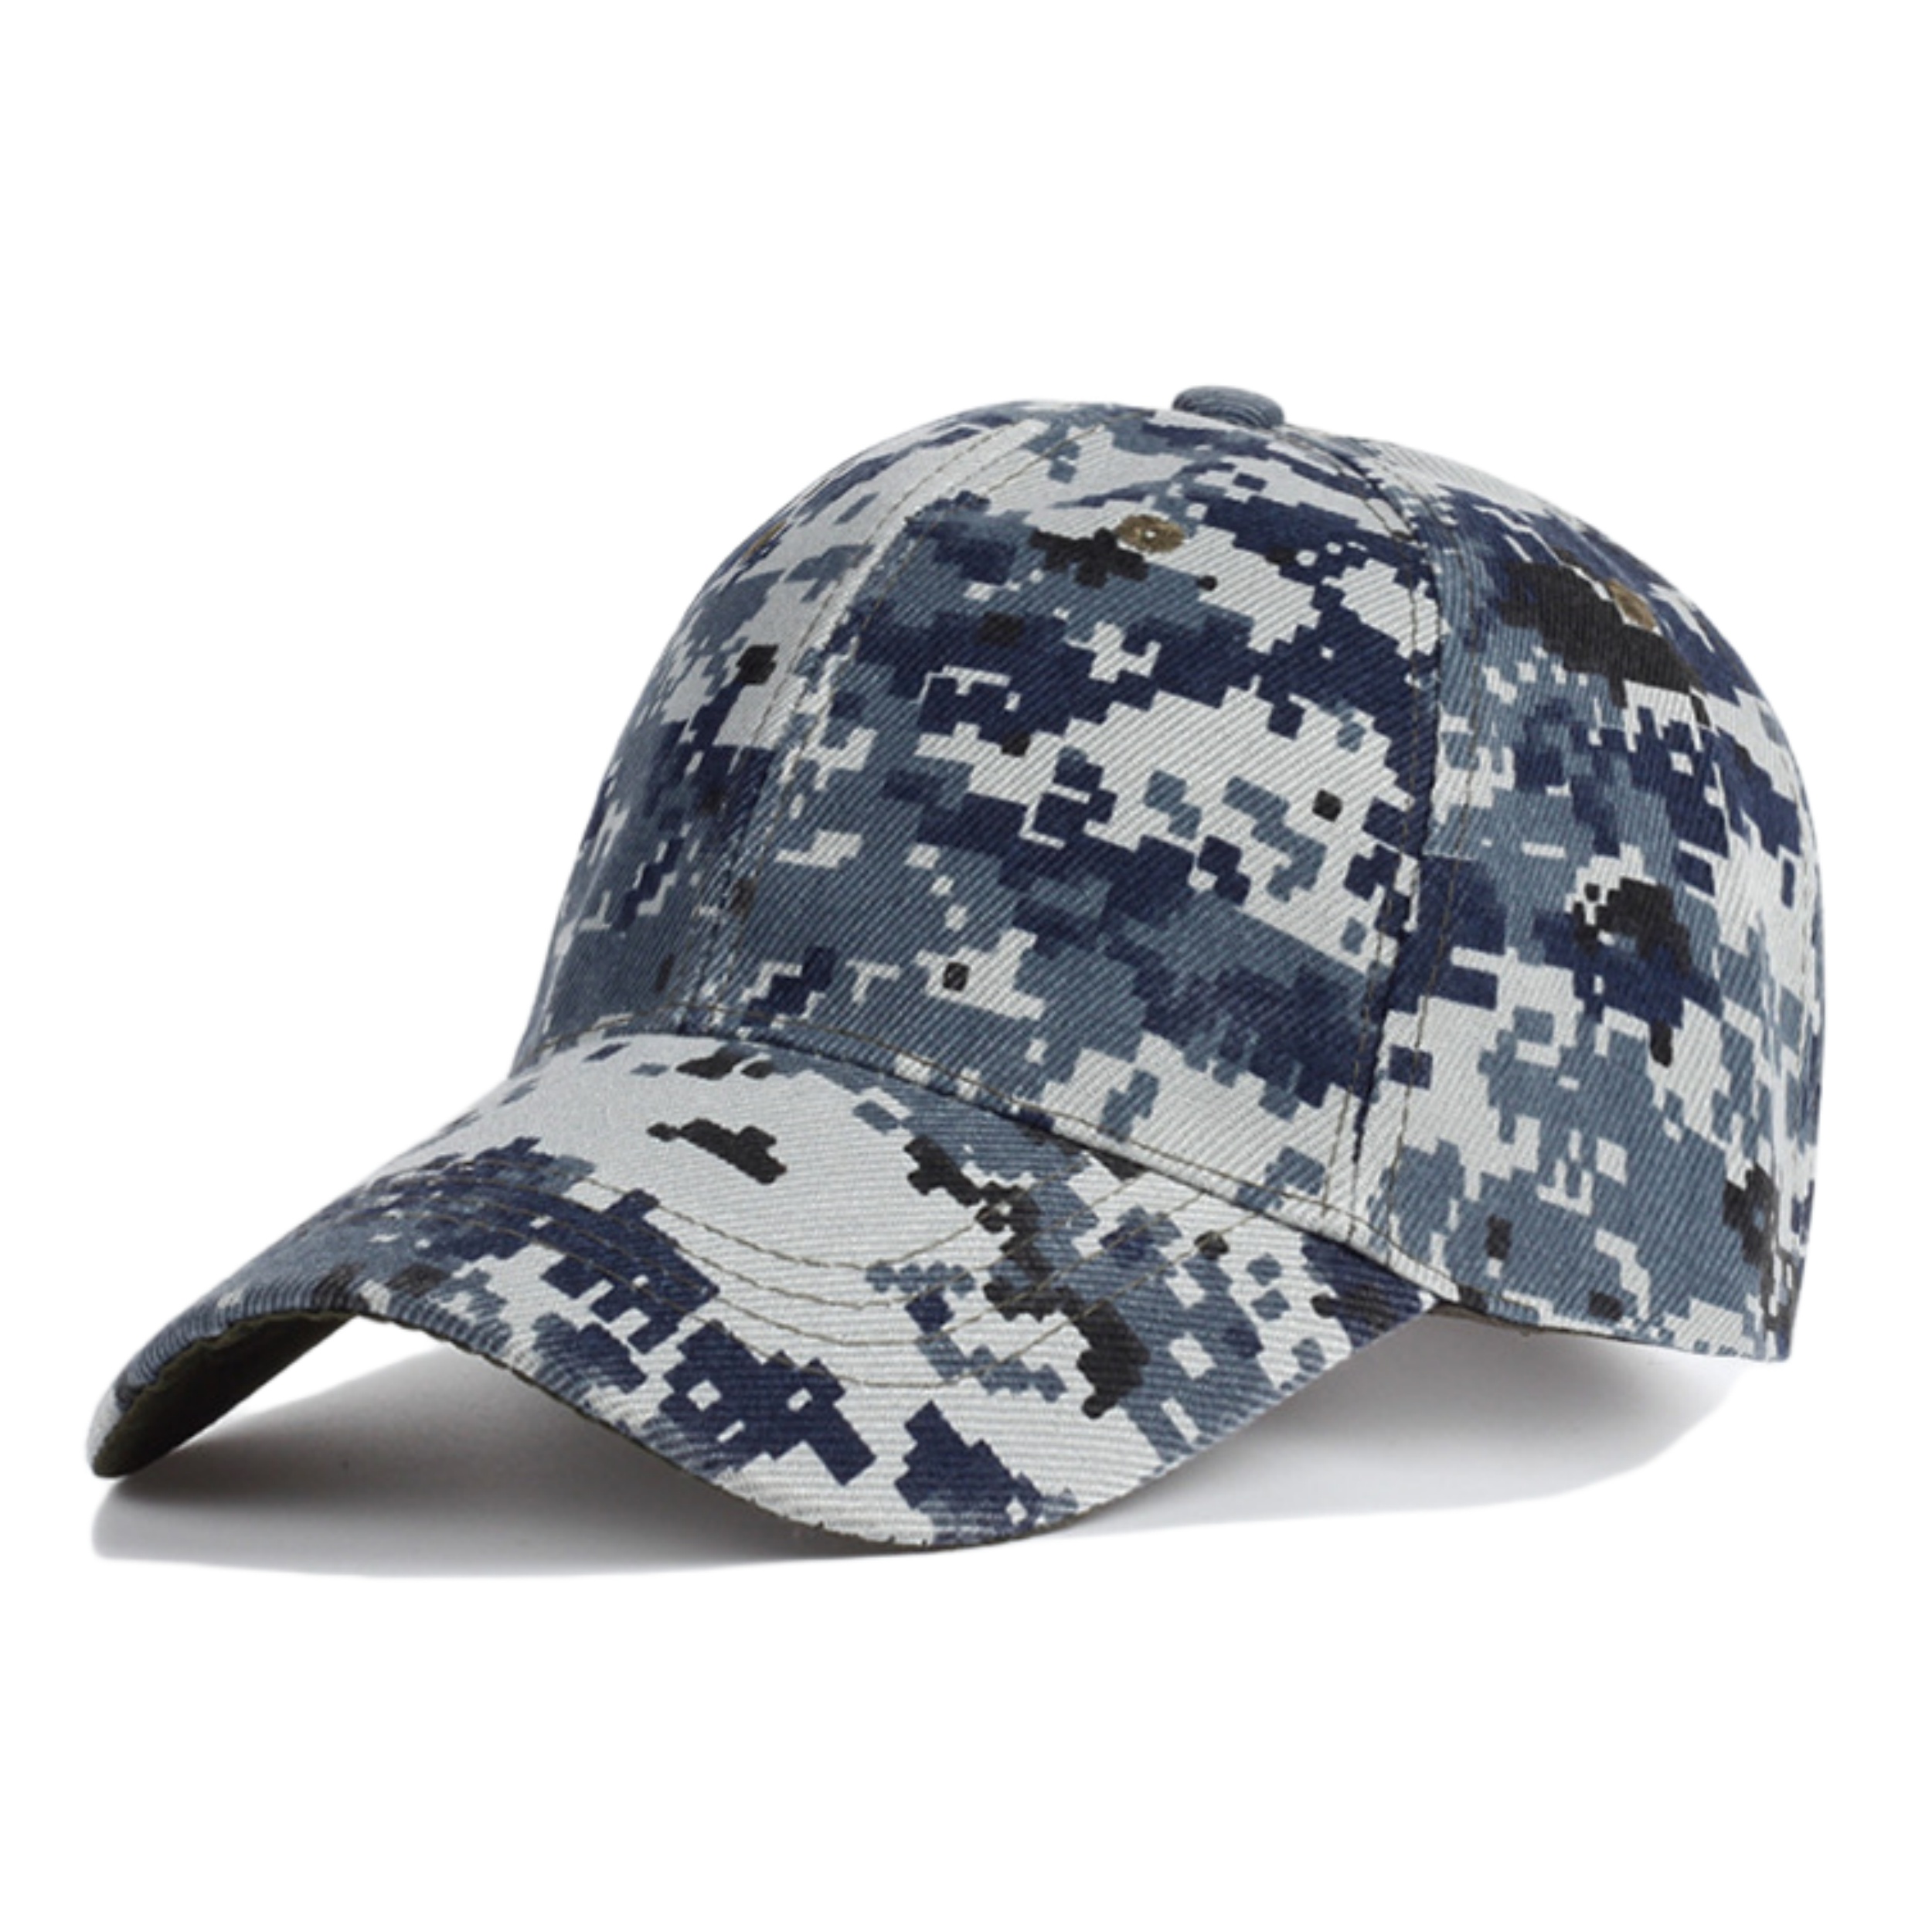 1pc Camouflage Baseball Hats For Running Cycling Outdoor Sports